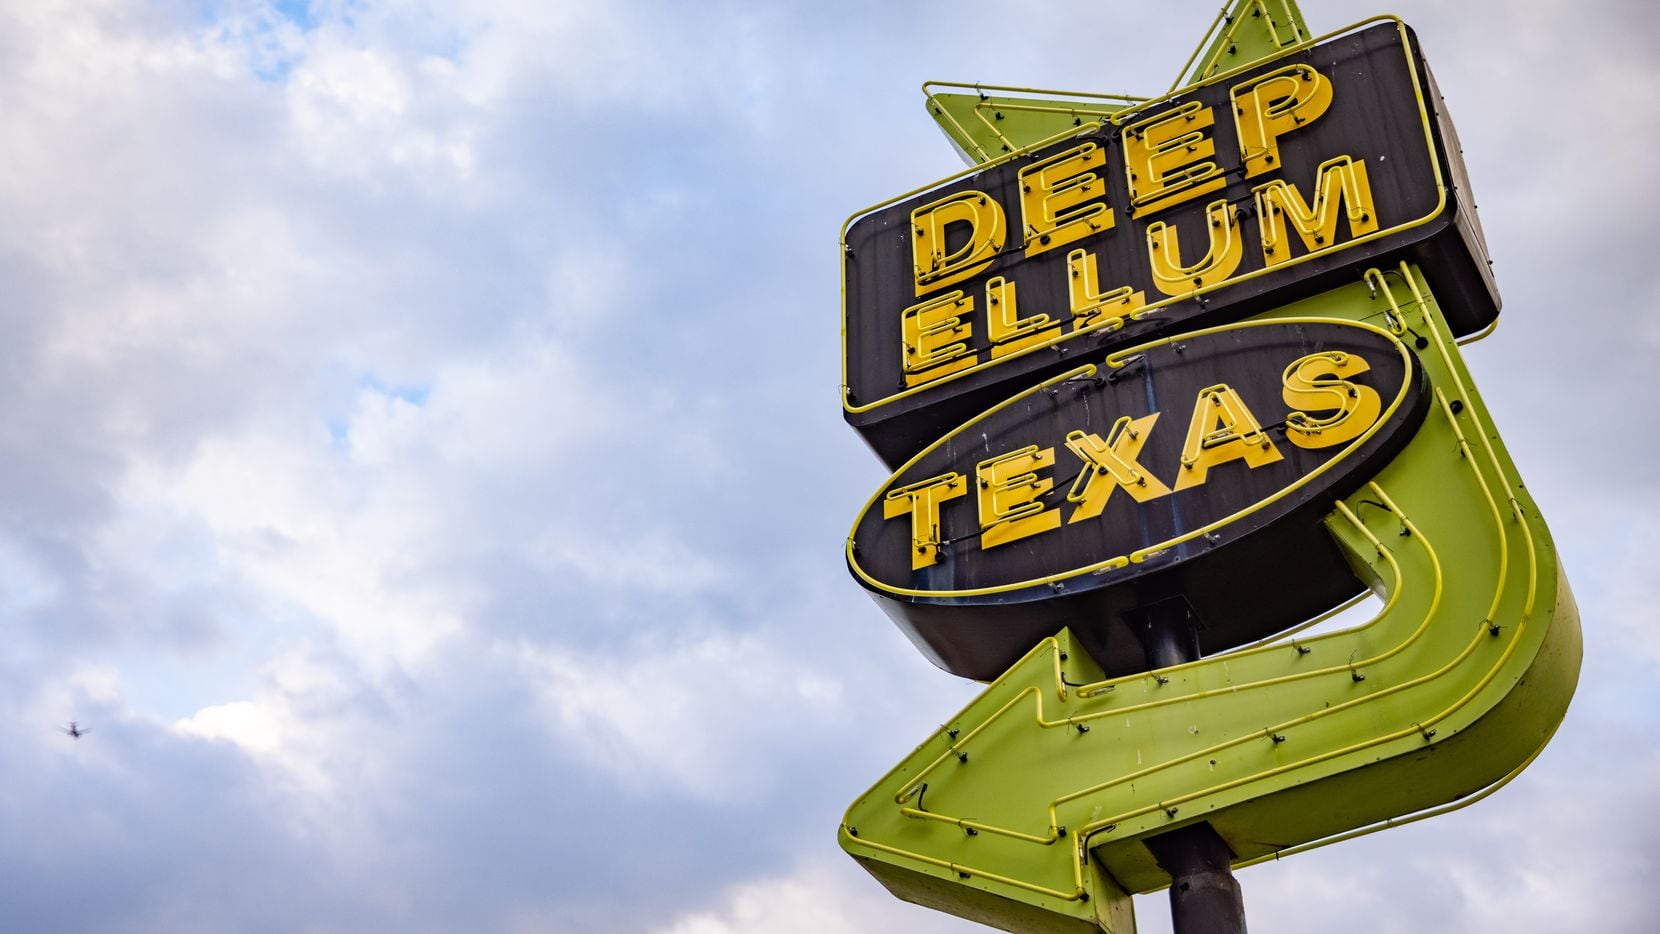 The Deep Ellum sign in Dallas photographed on Thursday, Apr. 8, 2021. (Juan Figueroa/ The Dallas Morning News)